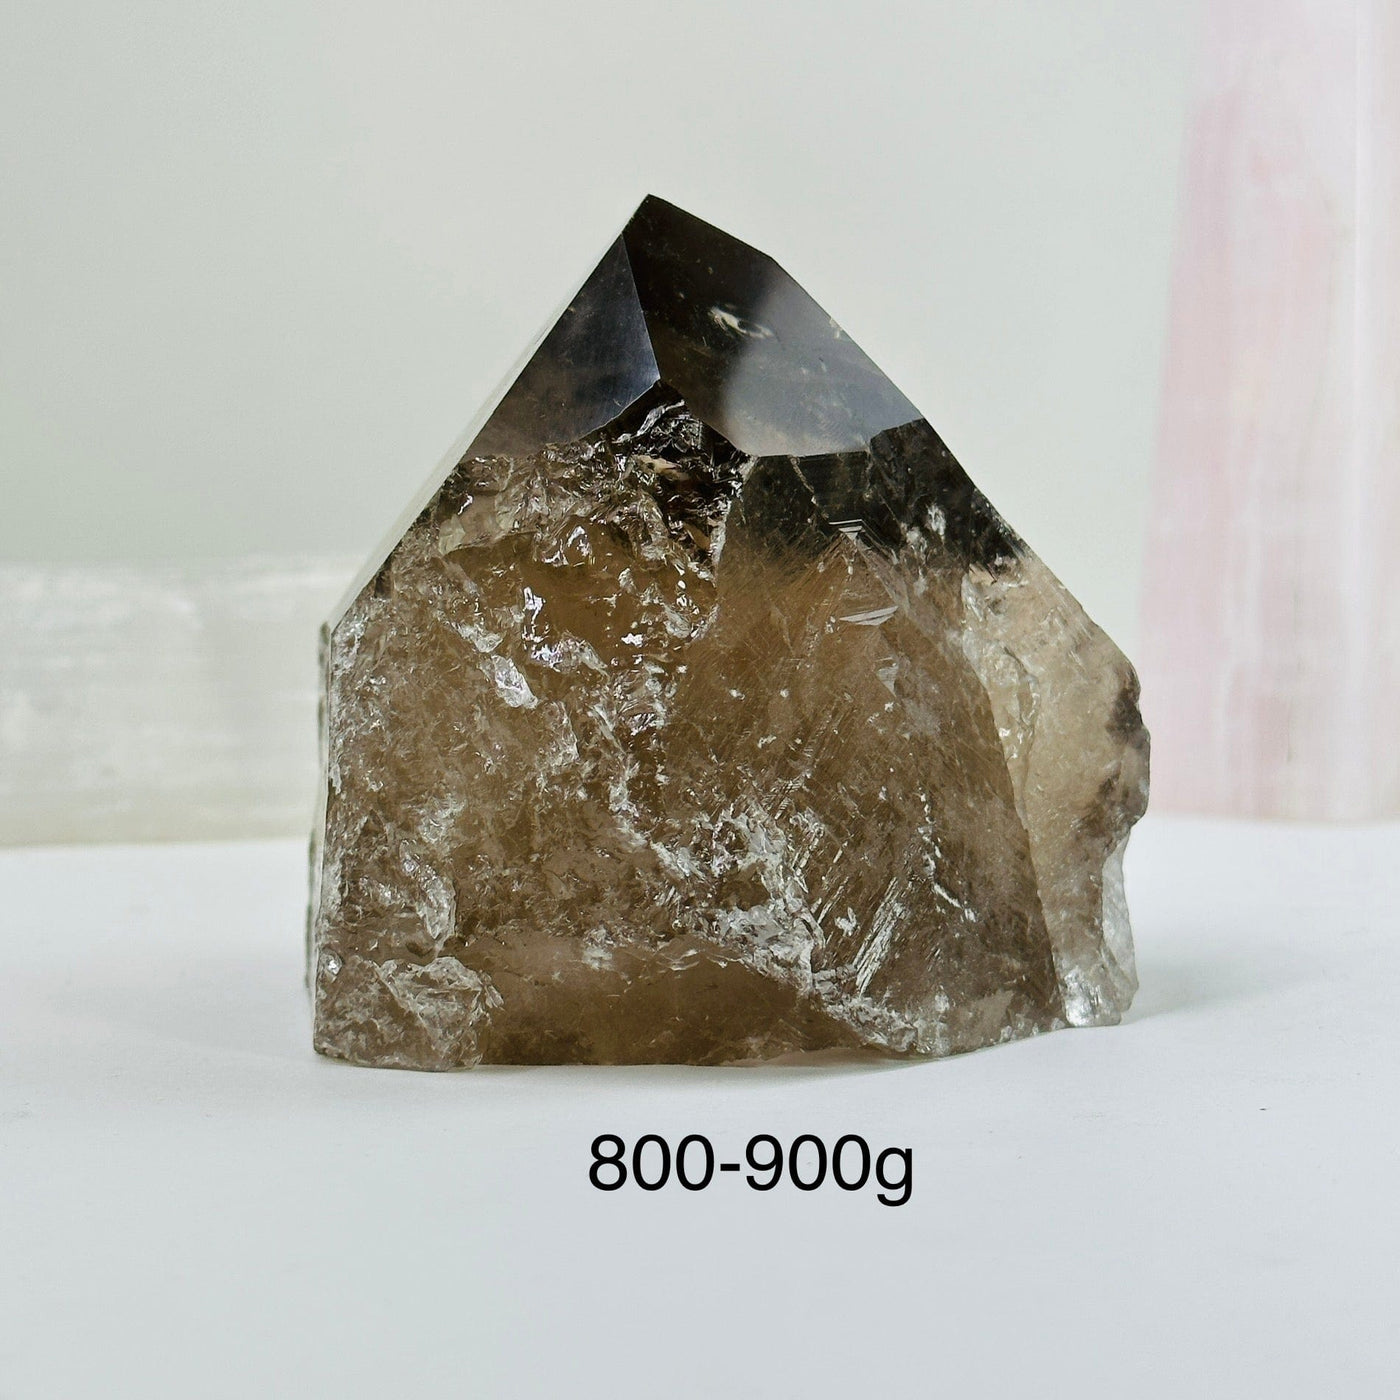 800-900g smoky quartz semi polished point with decorations in the background